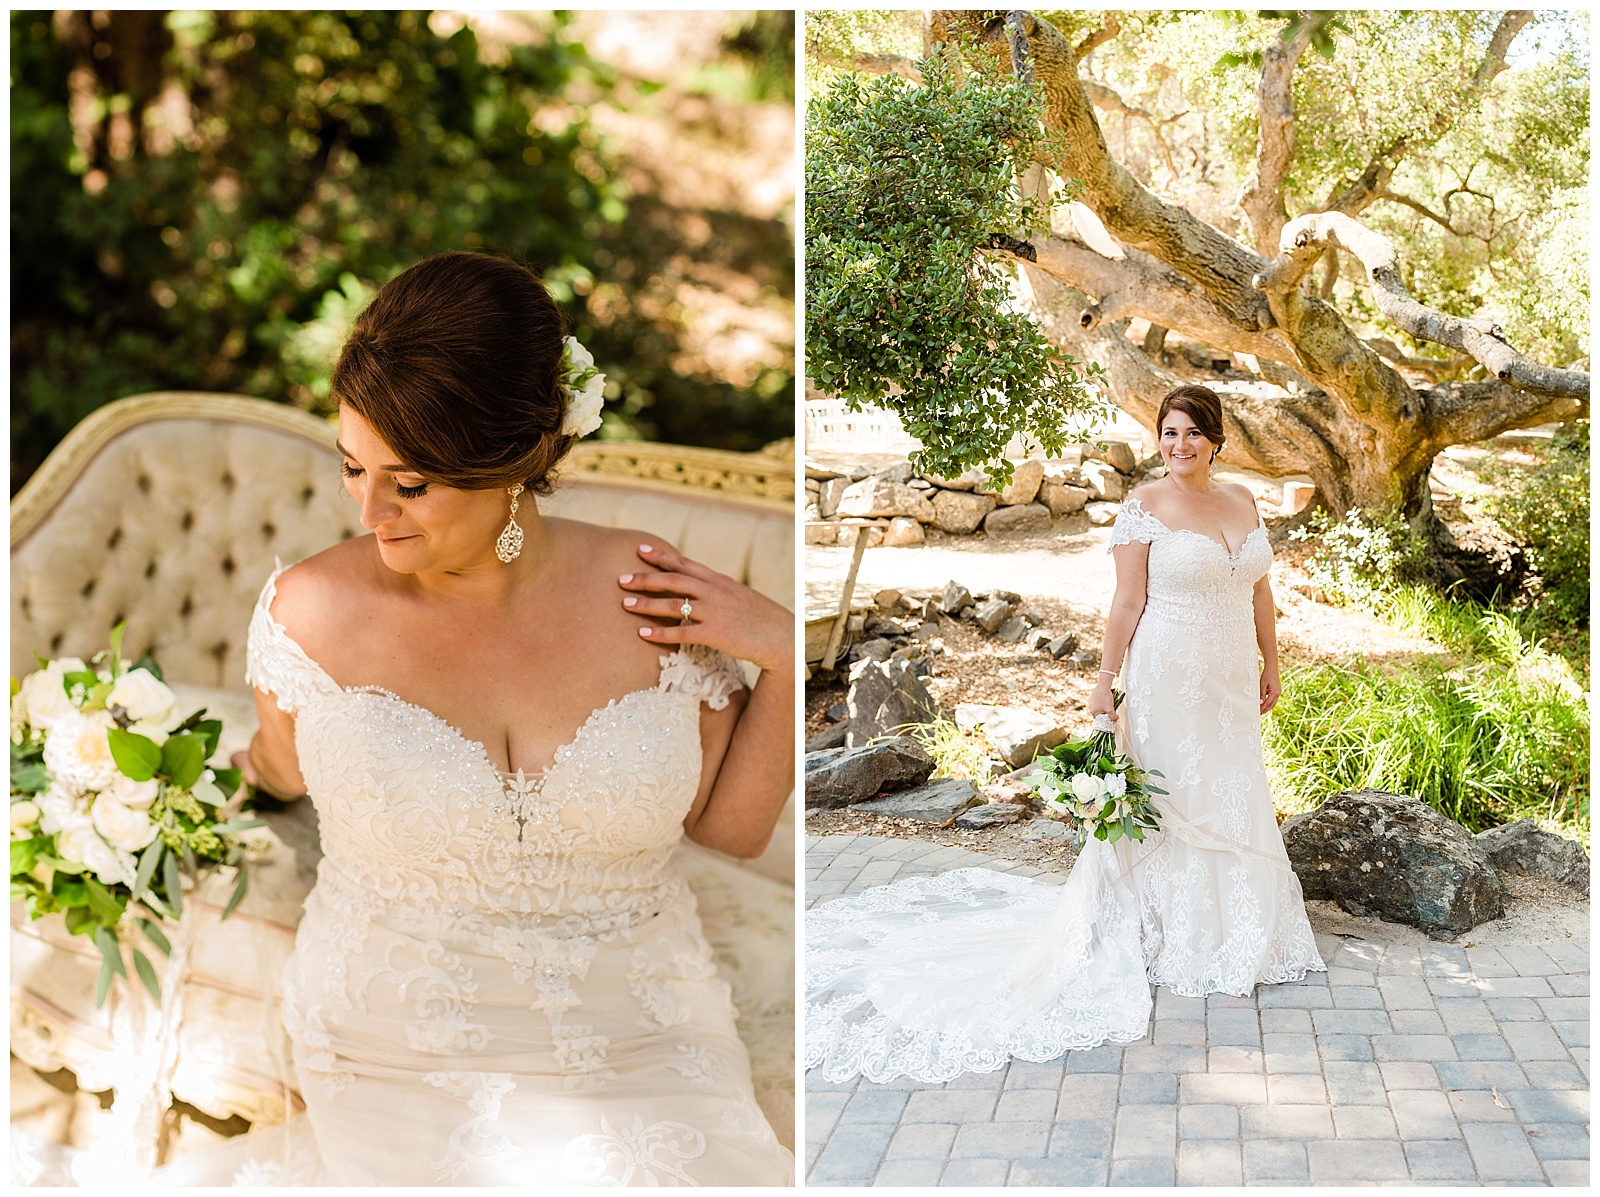 bridal portraits in a what up europe wedding dress